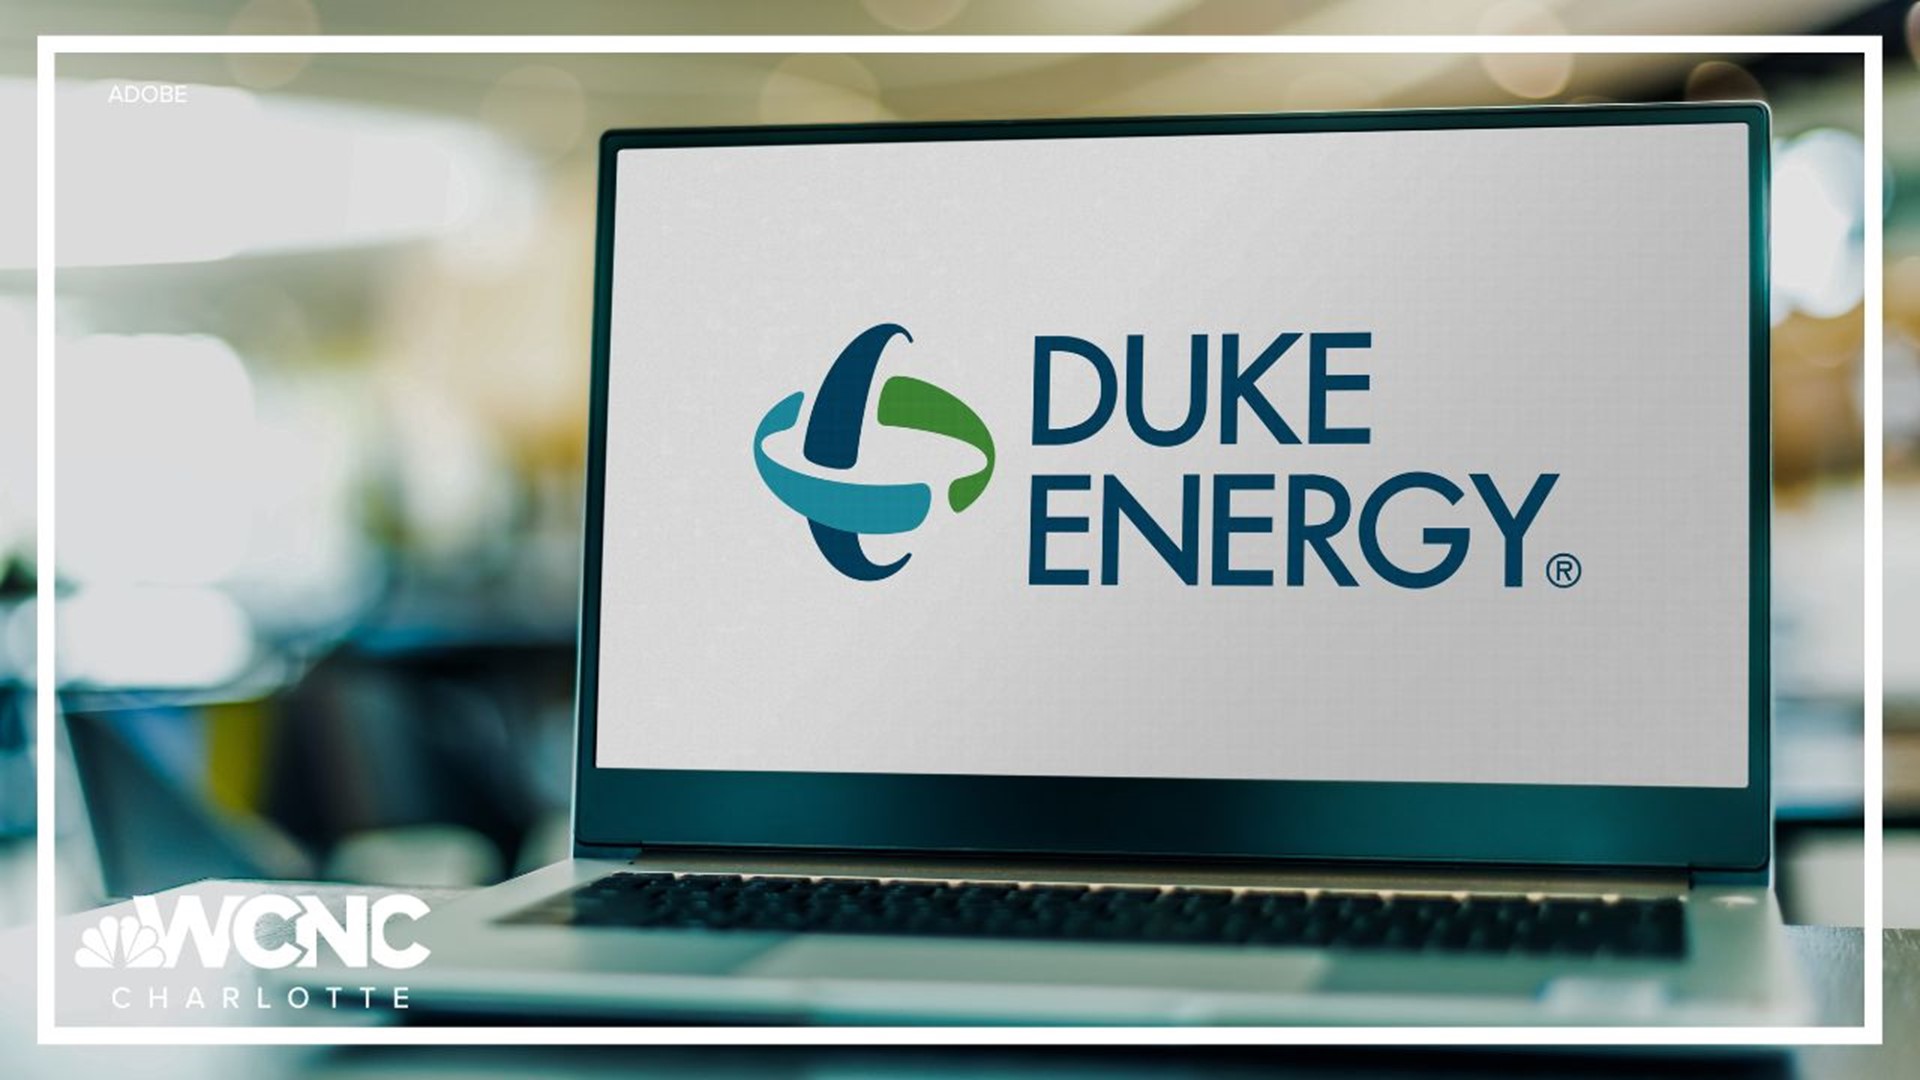 NC utilities commission approves Duke Energy rate hike